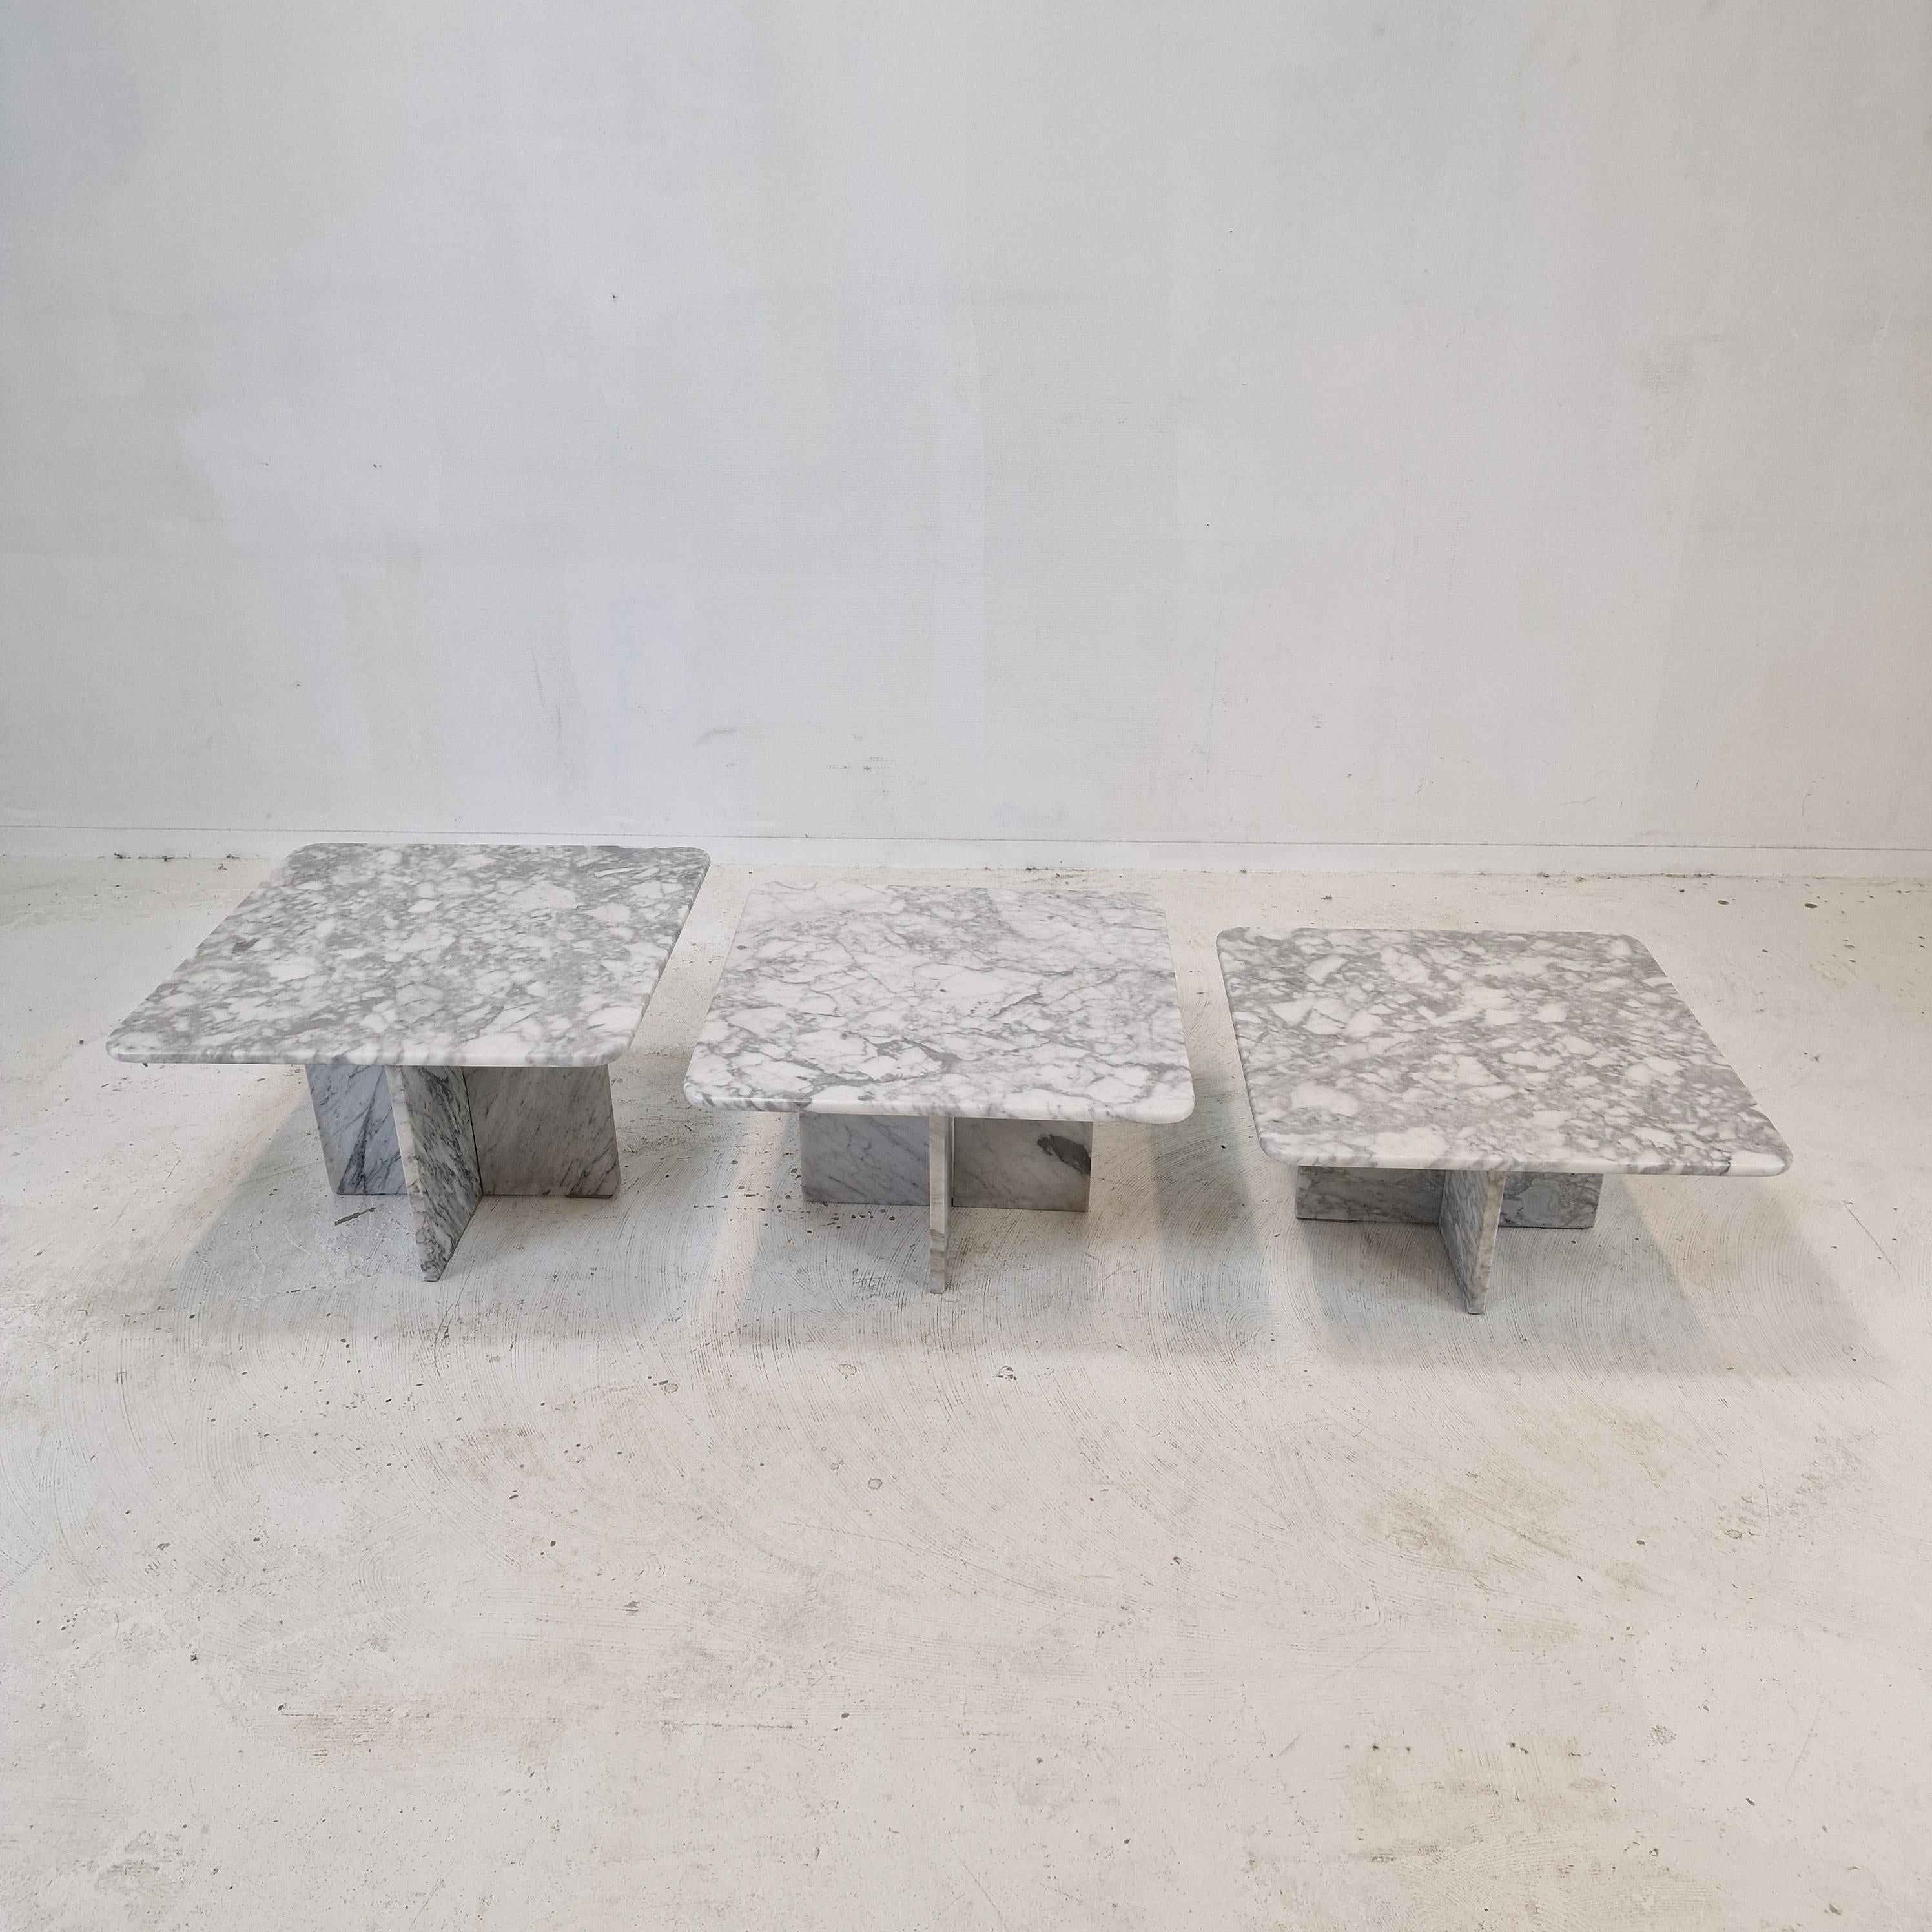 Set of 3 Italian Bianco Carrara Marble Coffee or Side Tables, 1980s For Sale 2